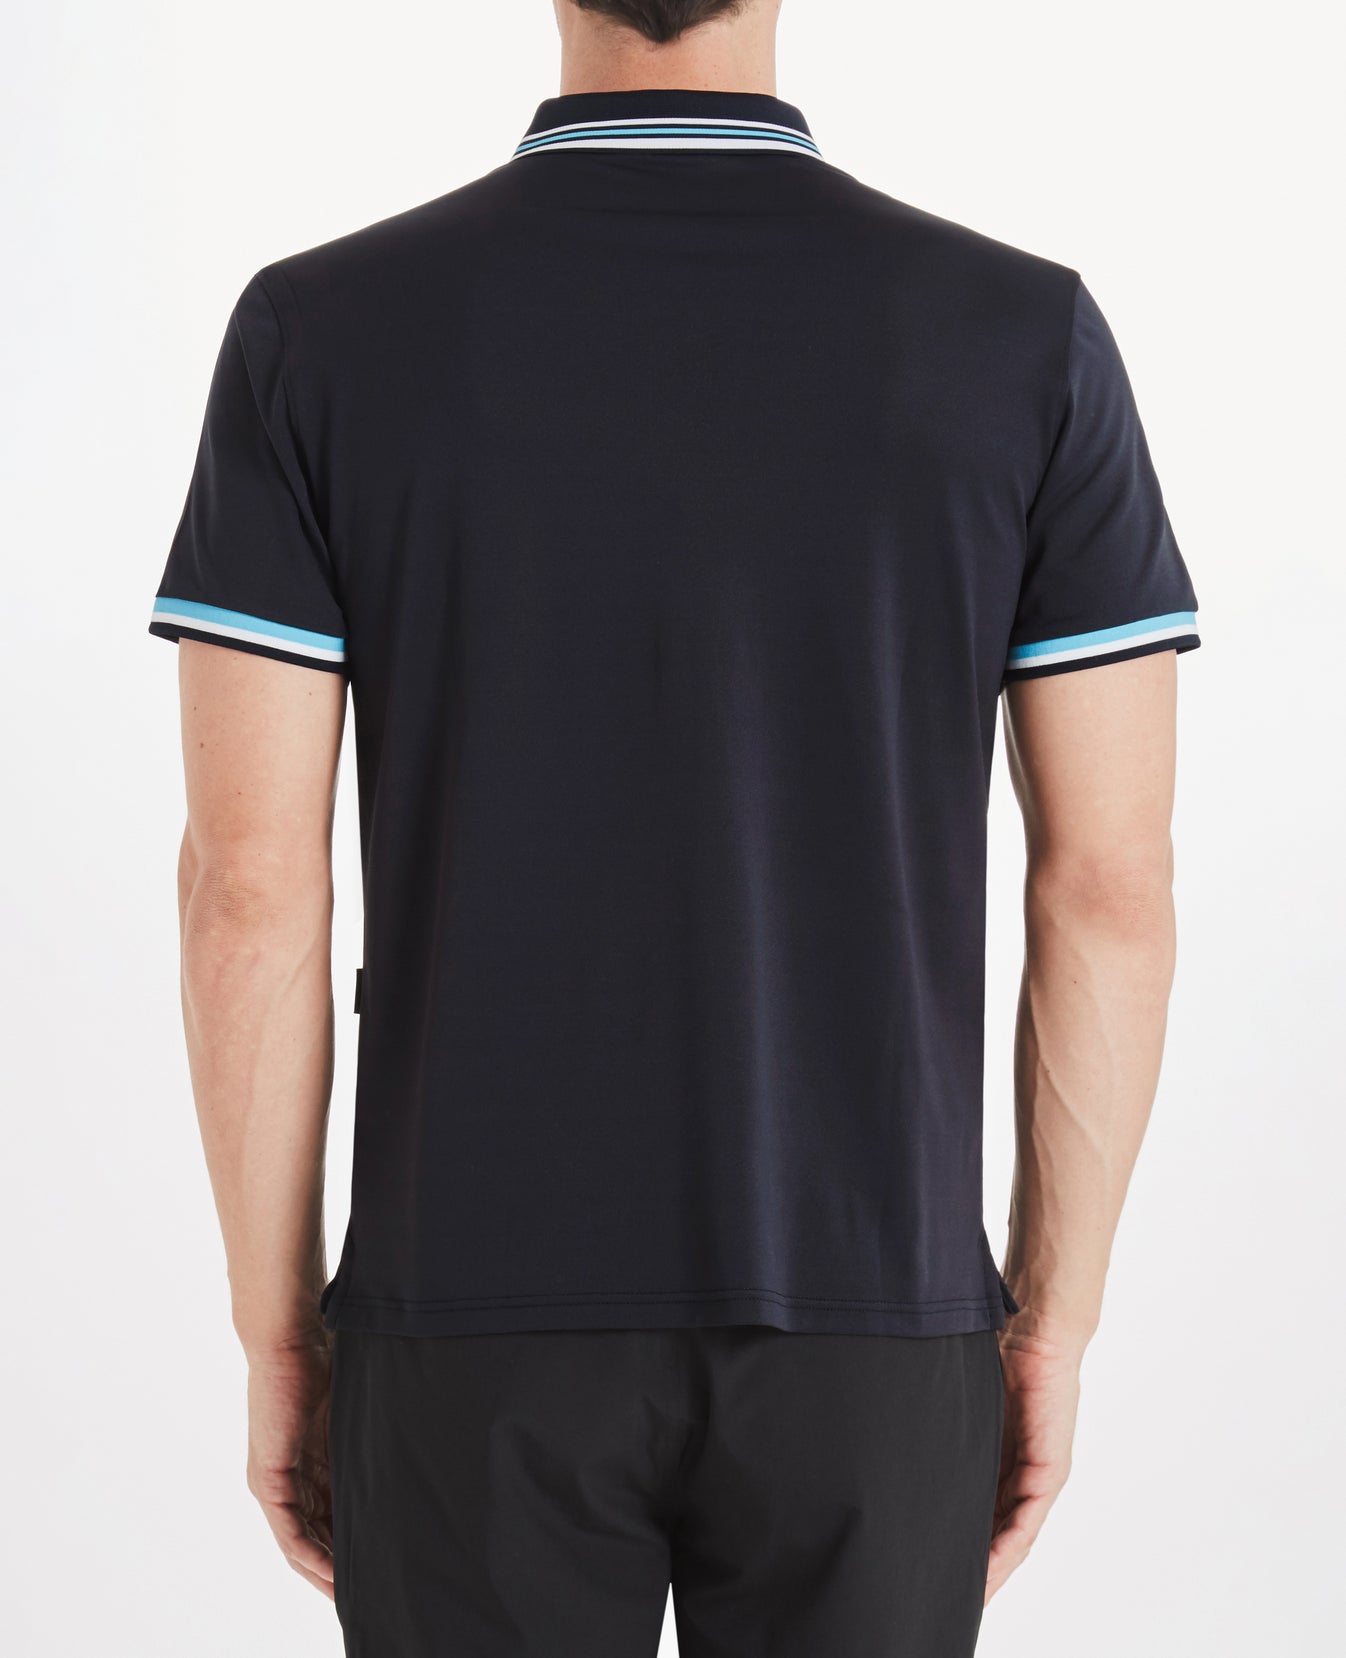 The Overland Polo Naval Blue Mens Top Photo 2